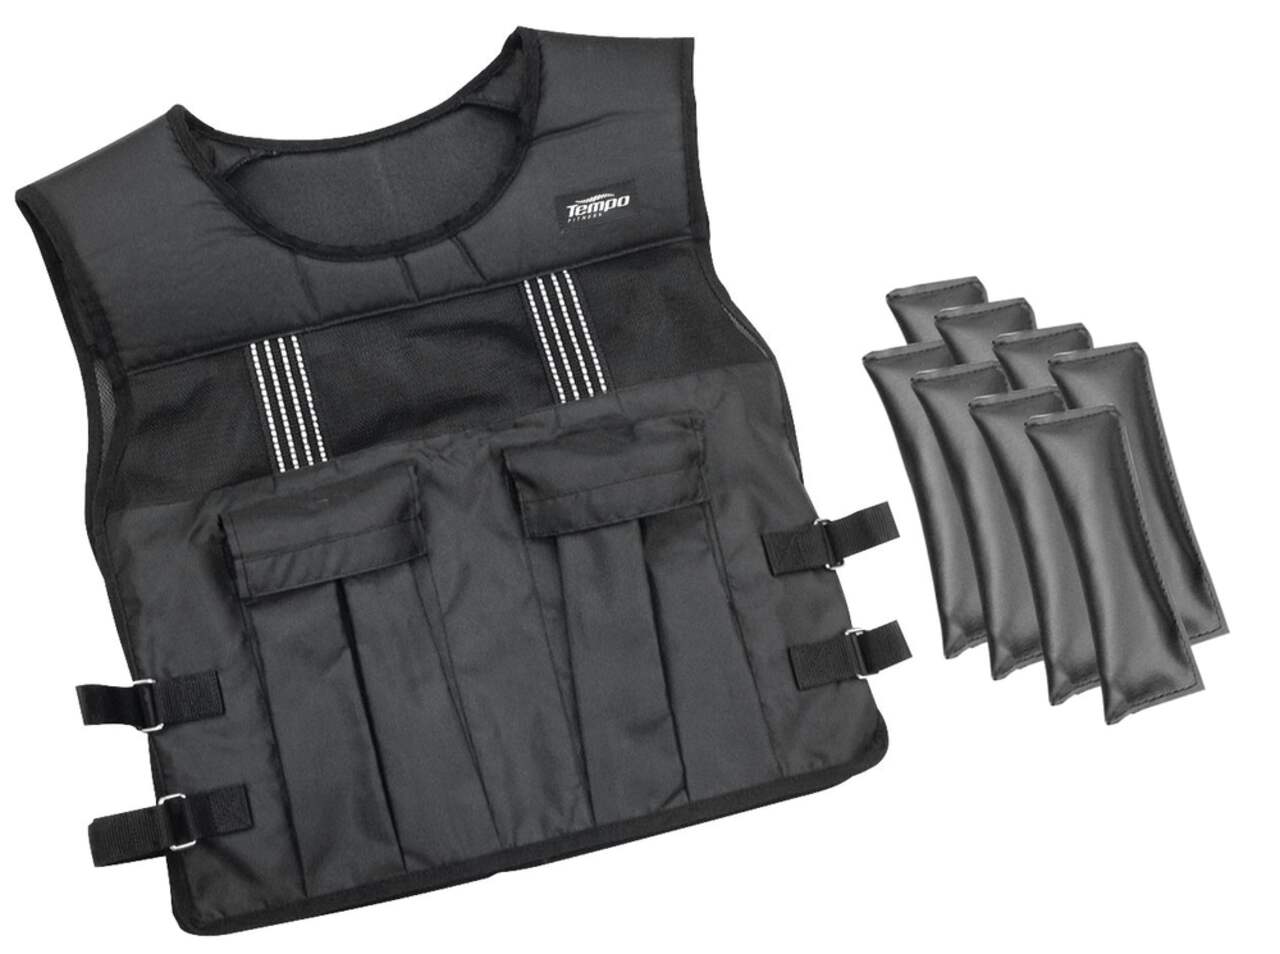 https://media-www.canadiantire.ca/product/playing/exercise/exercise-accessories/0840791/tempo-20lb-weighted-vest-5eec87cb-0e31-419f-ad32-49bc2d4f197d.png?imdensity=1&imwidth=1244&impolicy=mZoom